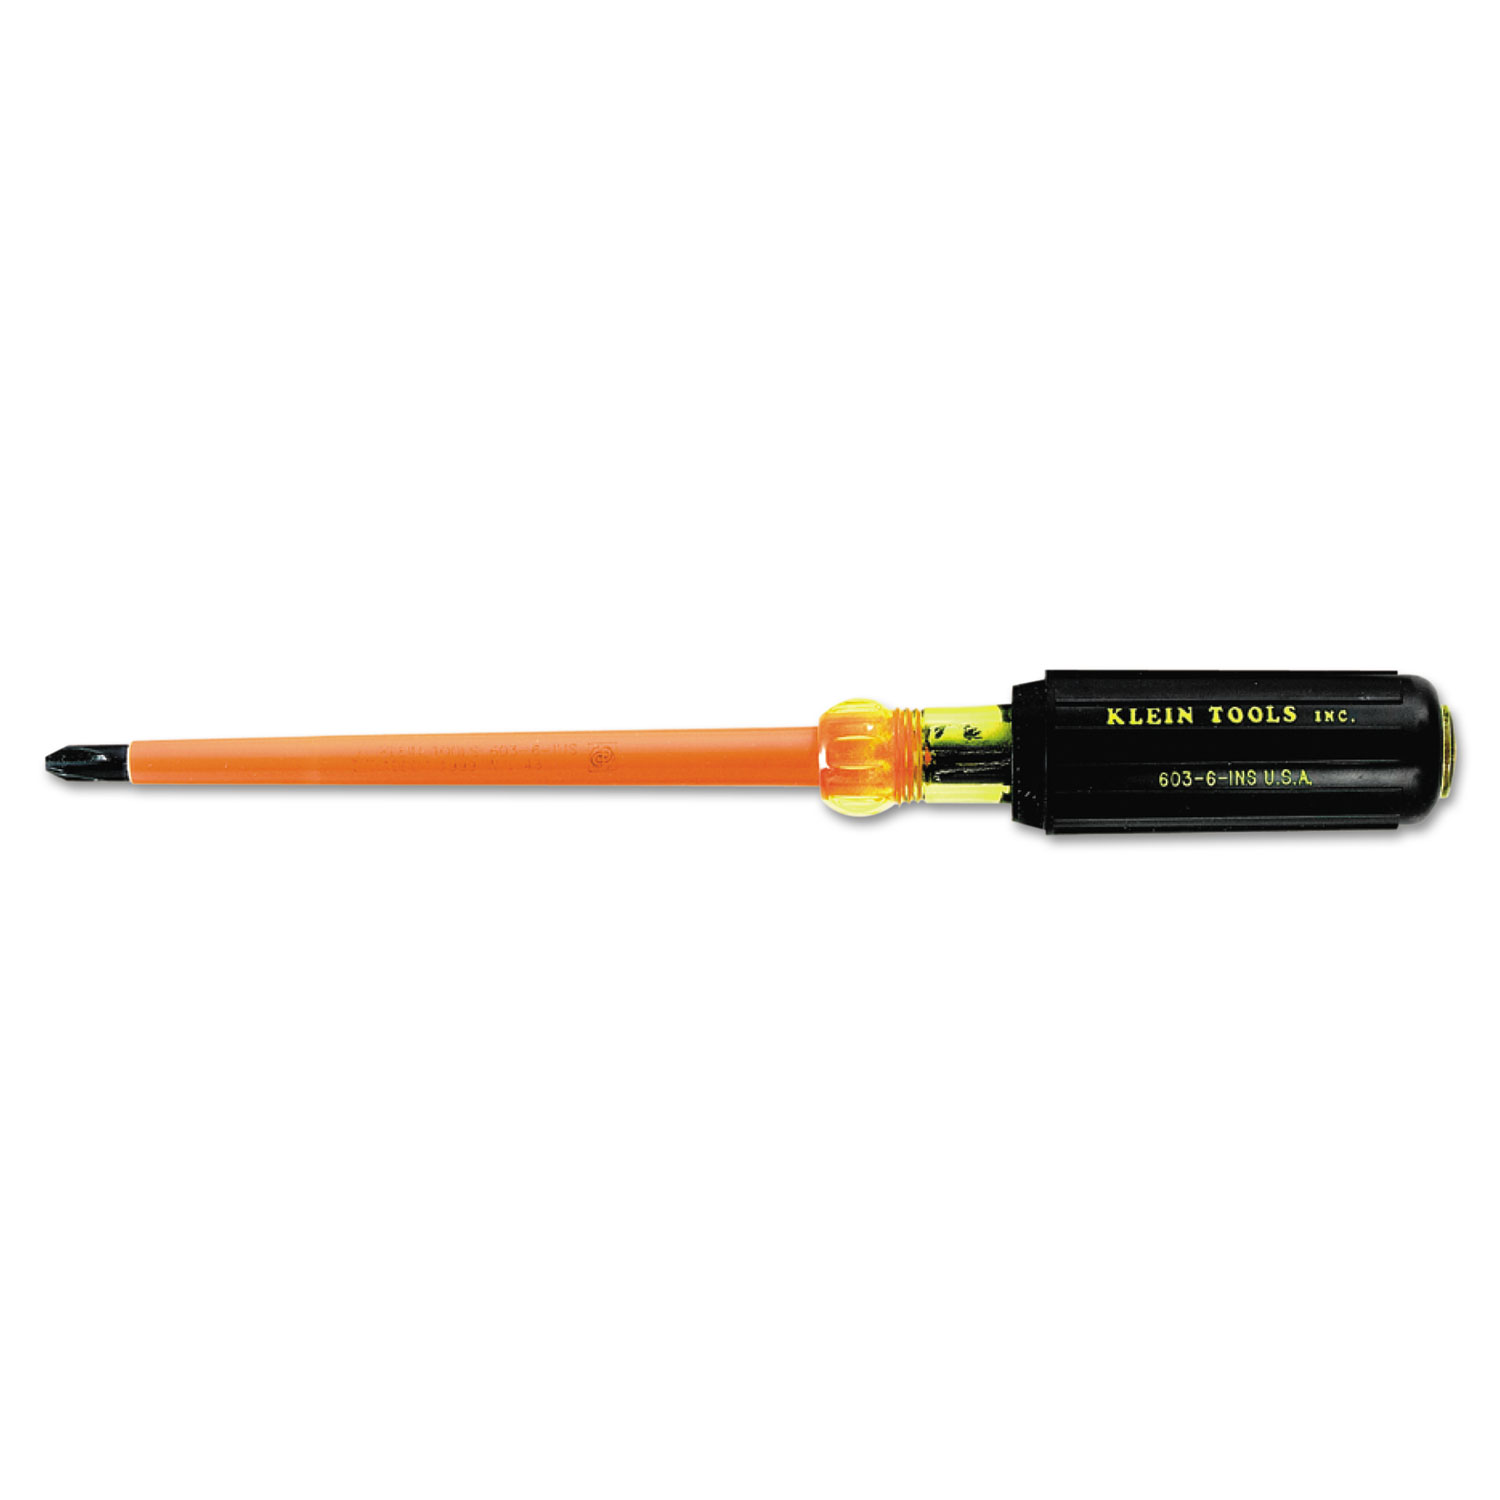 Insulated #2 Phillips-Tip Cushion-Grip Screwdriver, #2, 8 5/16 Long